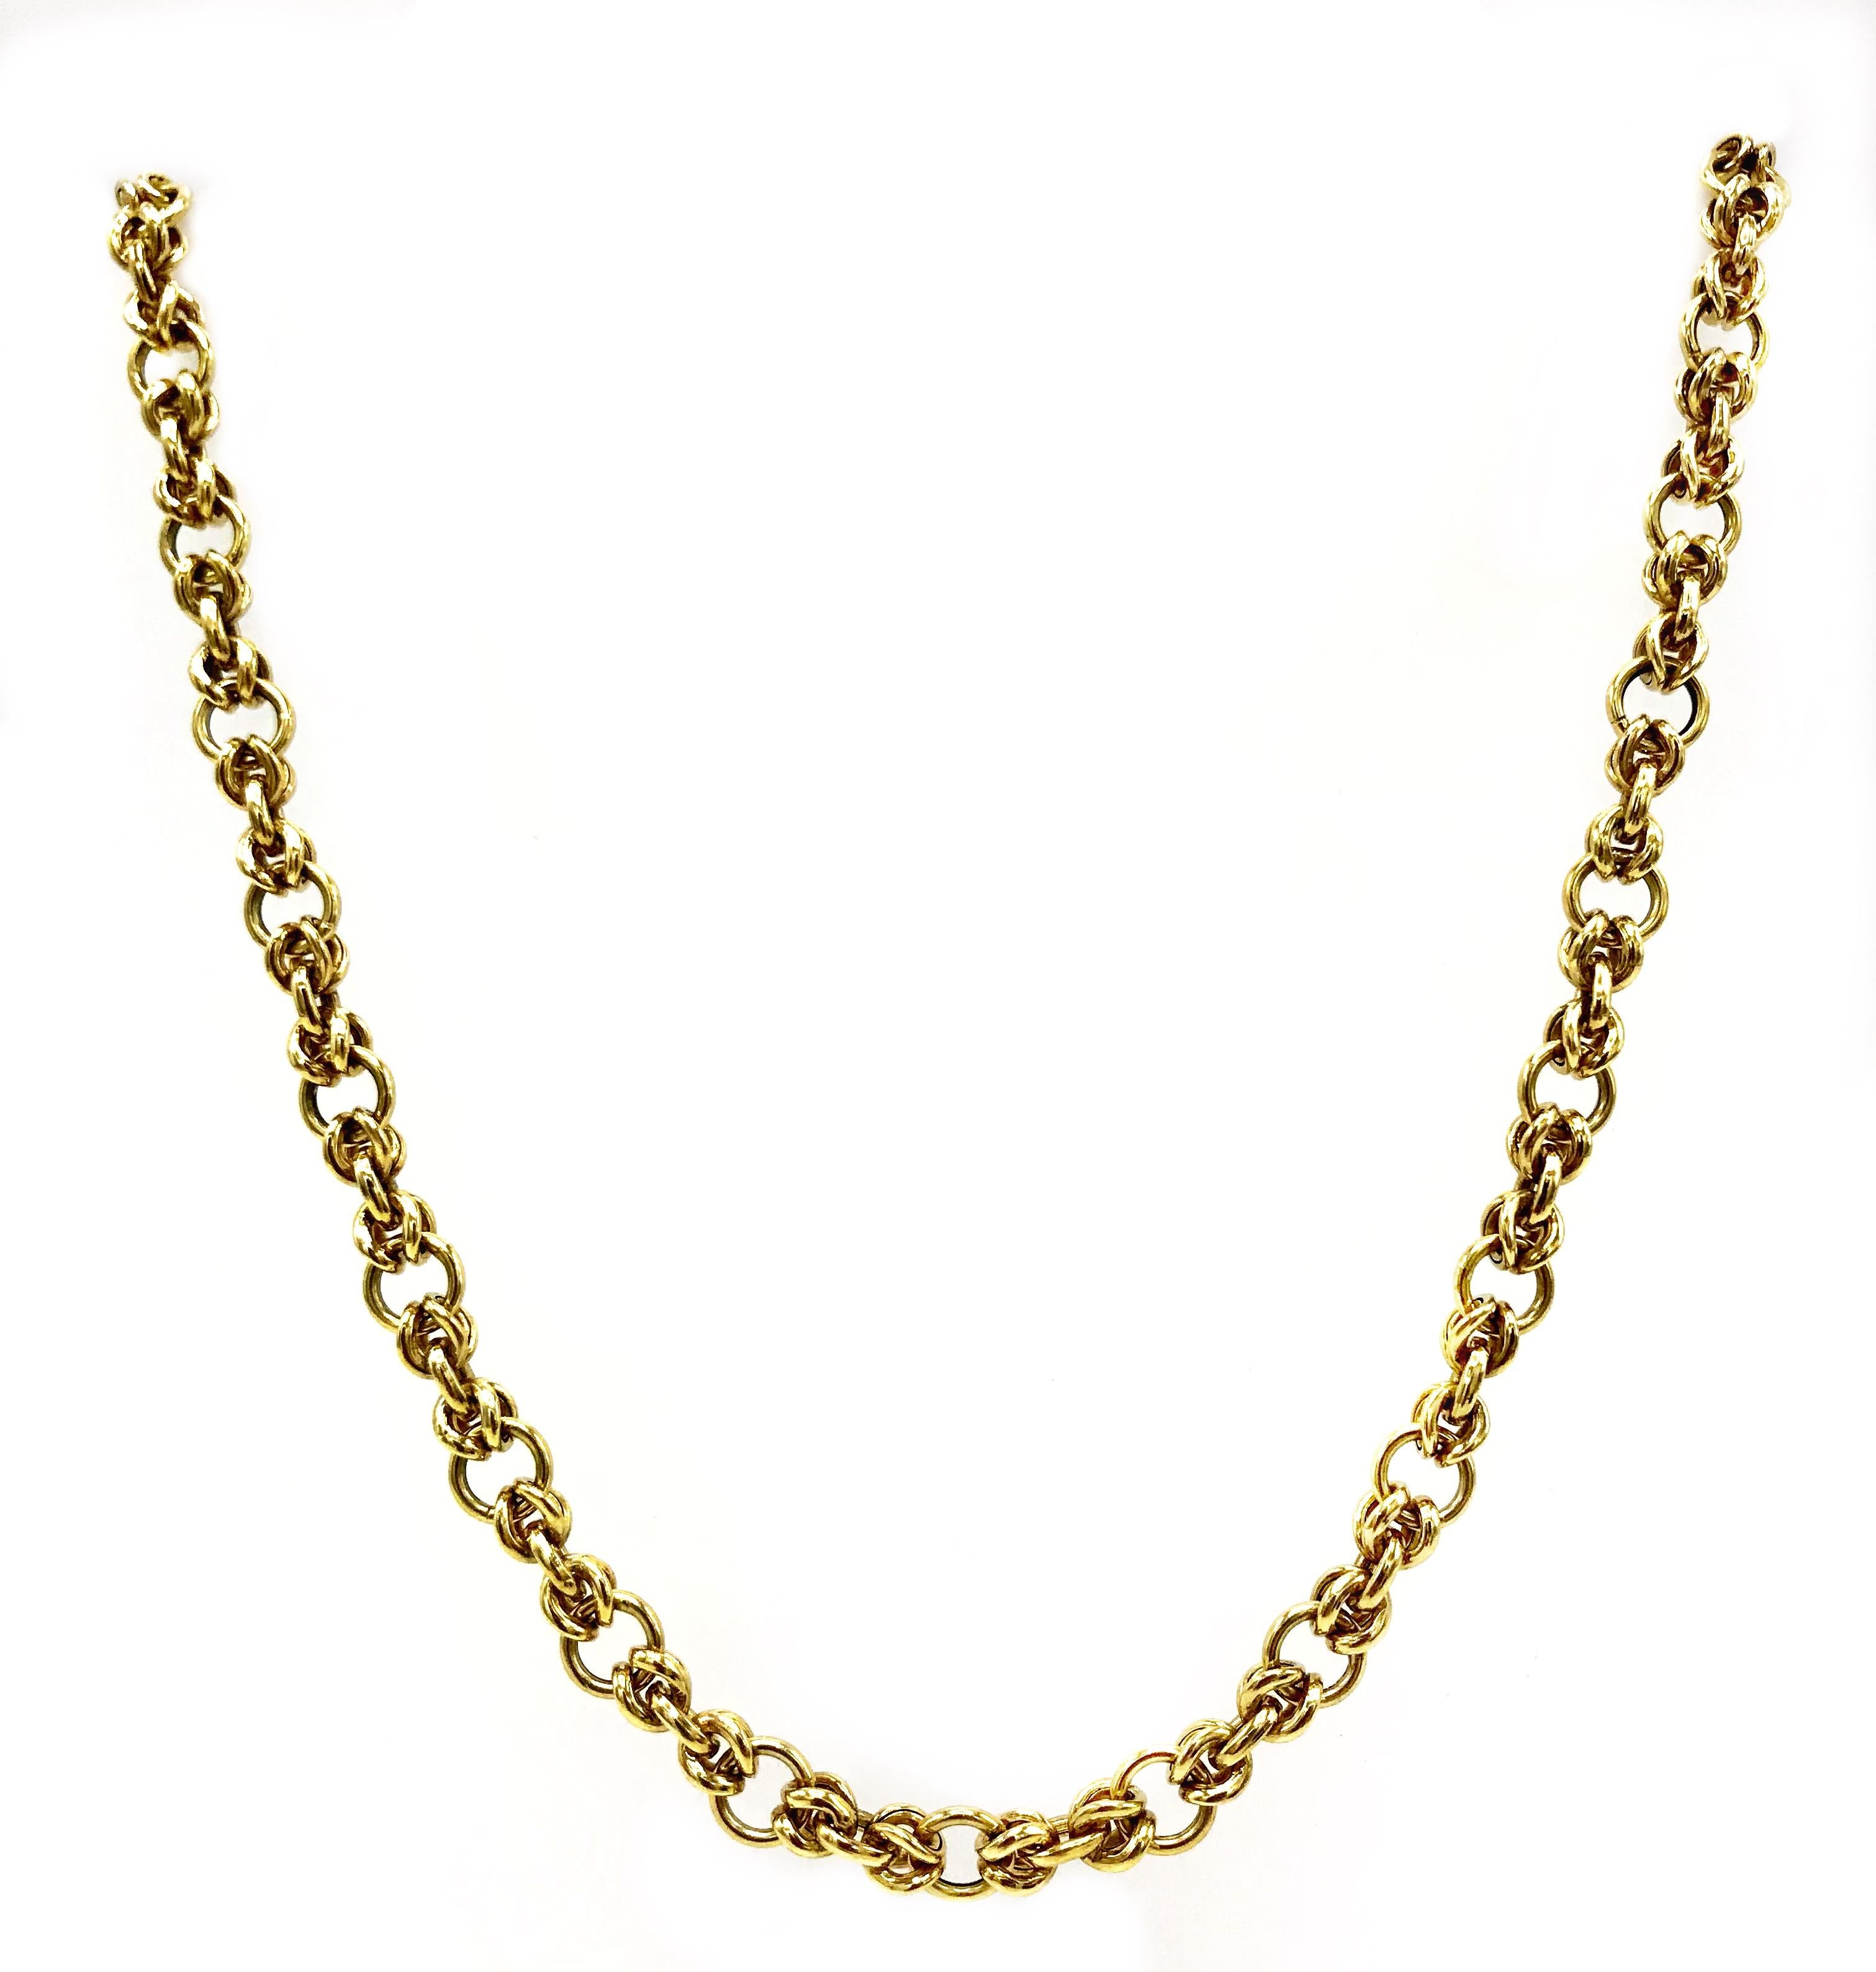 Vintage chunky chain necklace made of polished 14k yellow gold. Equally perfect for layering or wearing as a single piece. Has a nice looking puffed lobster clasp. Stamped with a country of origin (Italy) and a hallmark for 14k gold. 
Measurements: